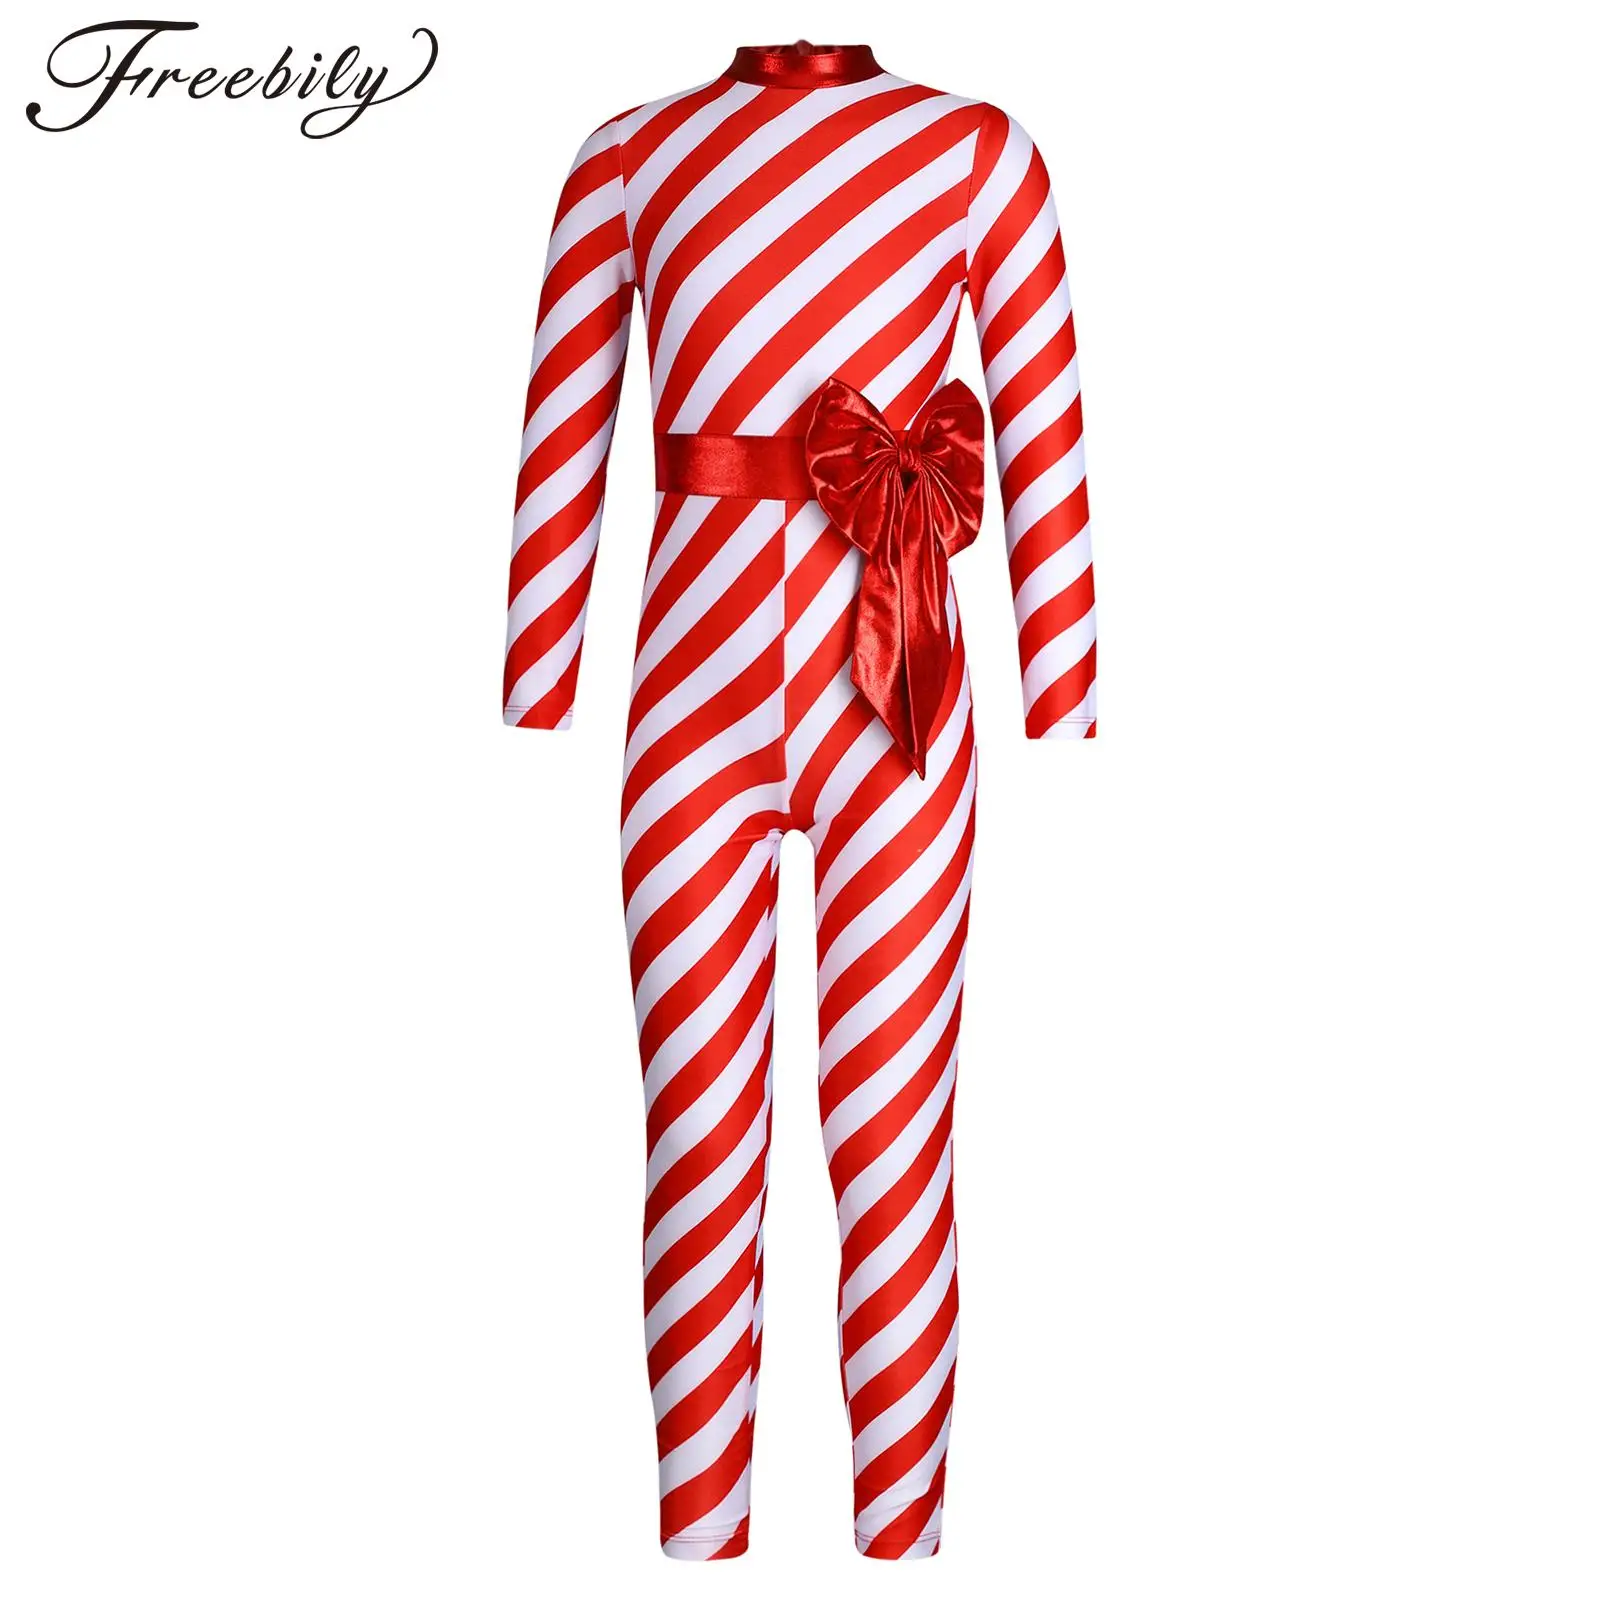 

Kids Girls Christmas Candy Cane Costume One-Piece Striped Big Bow Ballet Dance Gymnastic Unitard Jumpsuit for Xmas Holiday Party